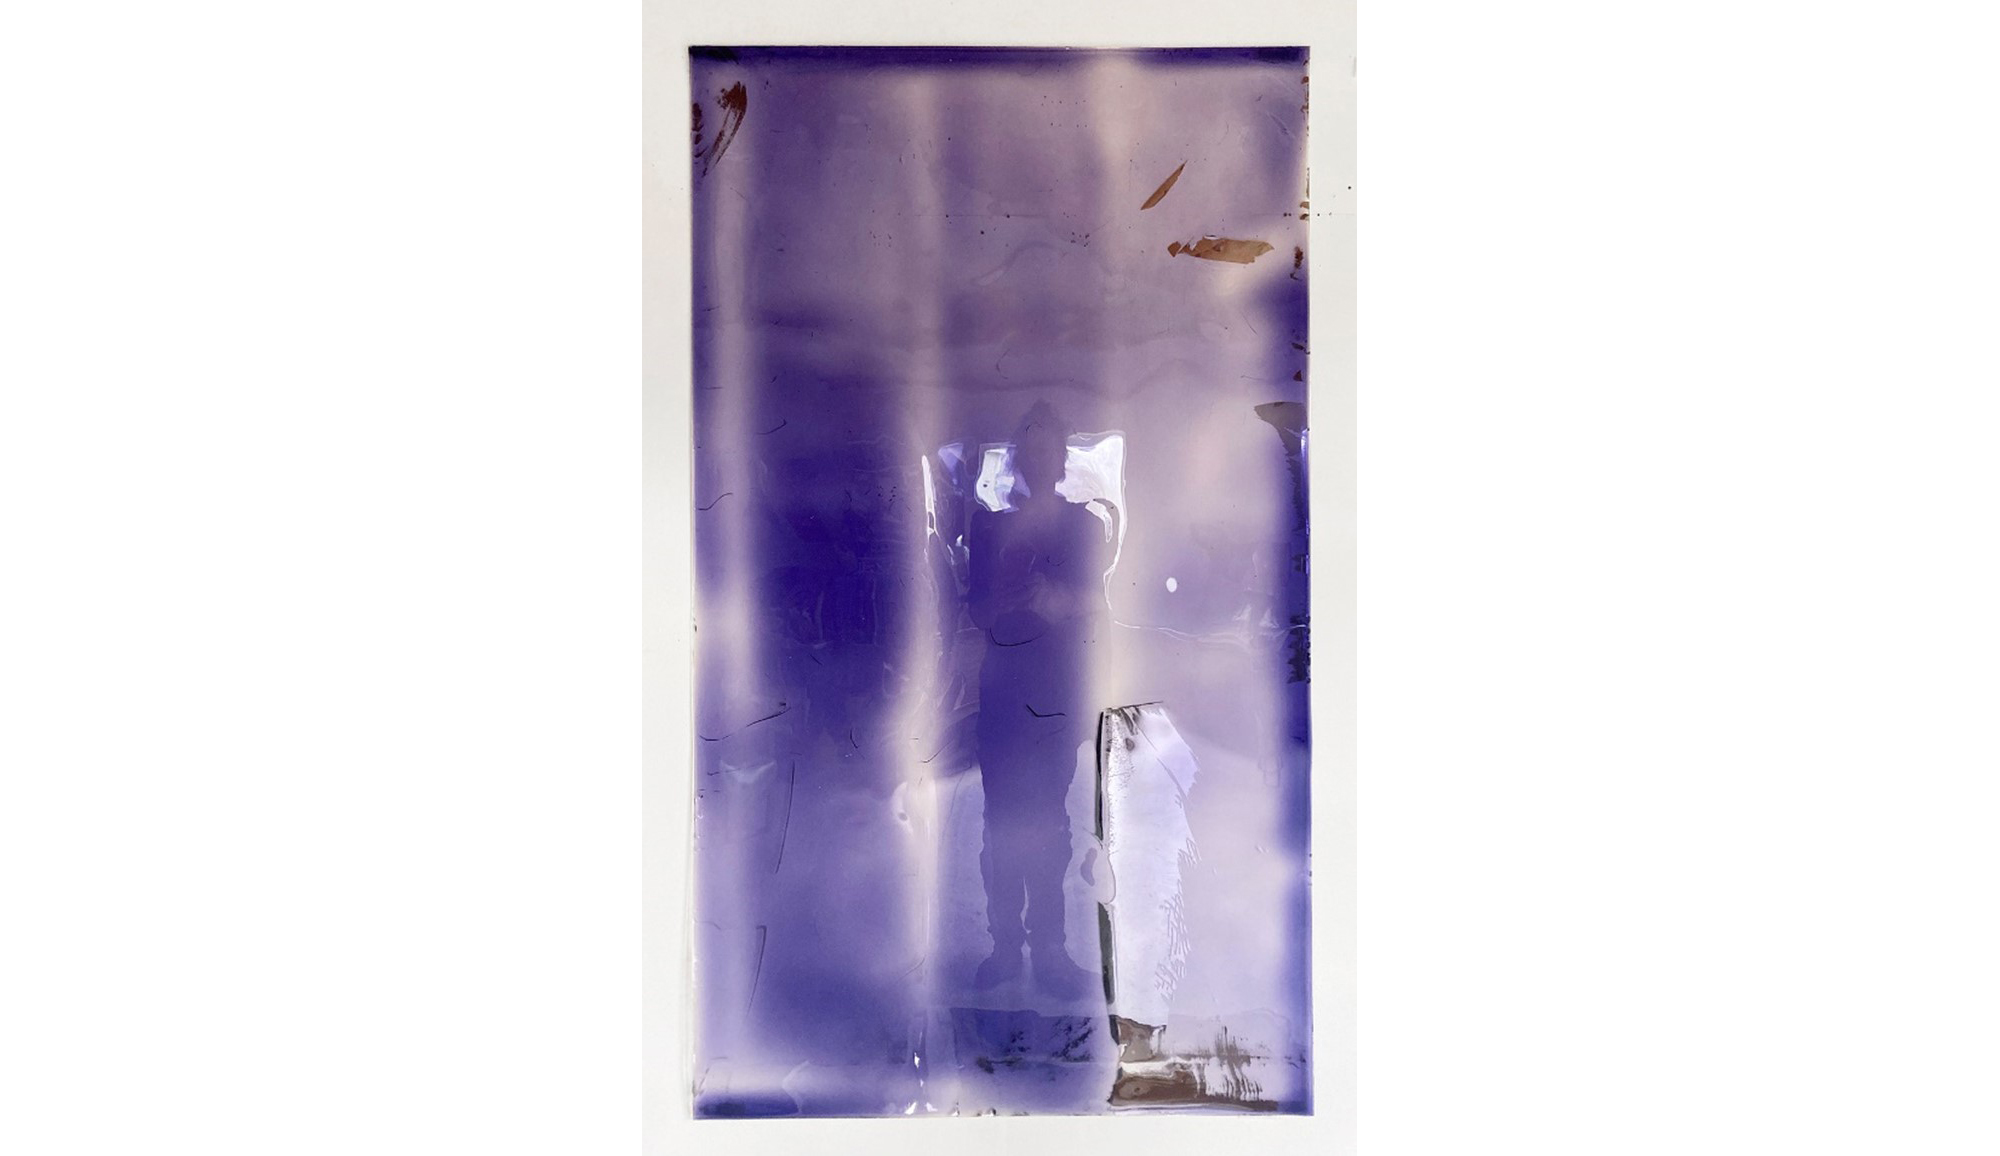 Carrie Yamaoka, 24 by 24 (redux), 2000/2021. Reflective polyester film and epoxy resin